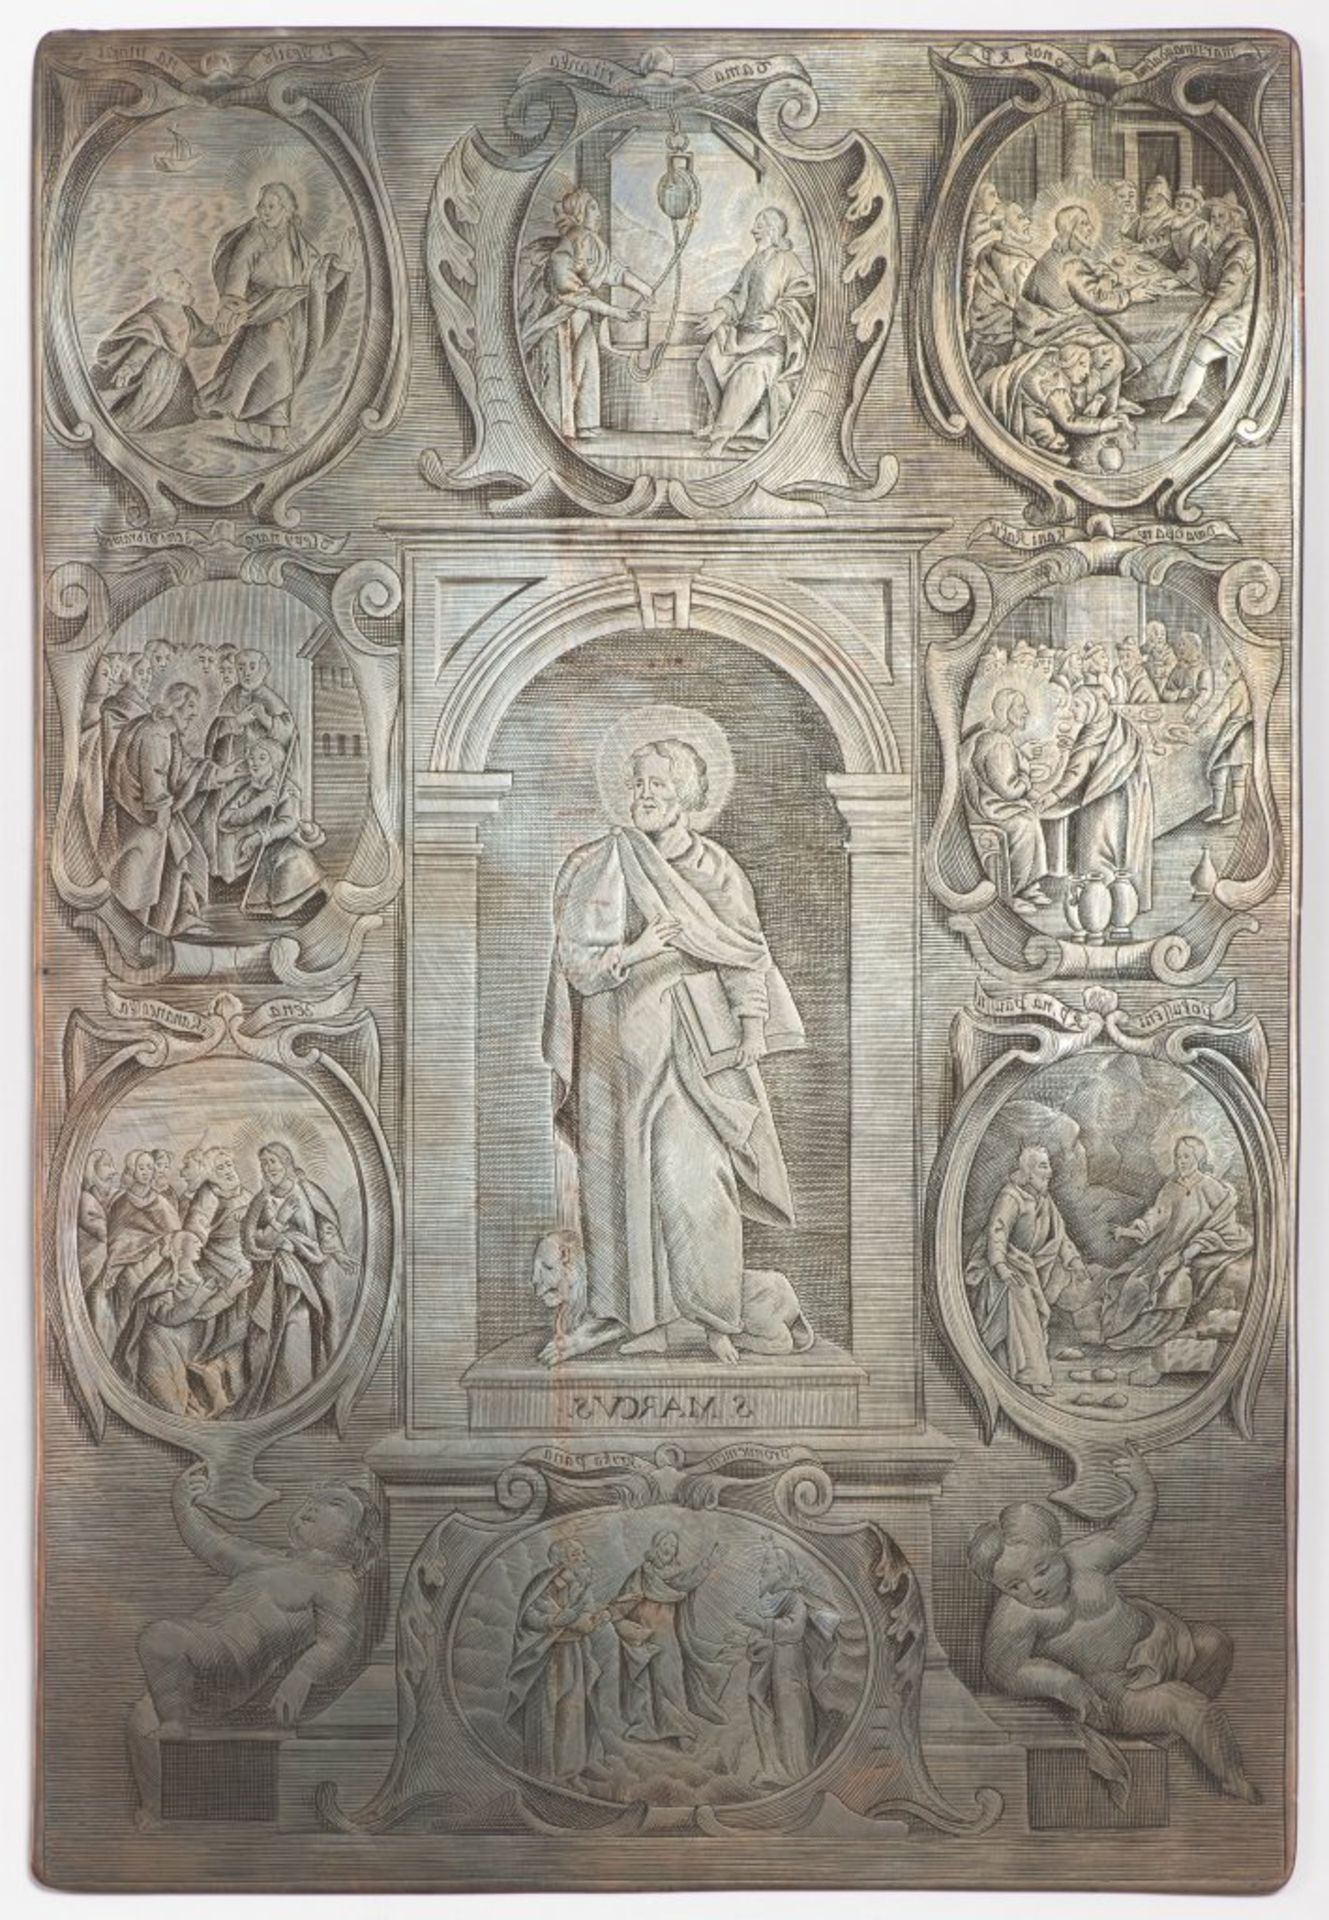 A GROUP OF THREE BAROQUE COPPER DIES FOR PRINTING THE WENCESLAS BIBLE Late 17th/early 18th century